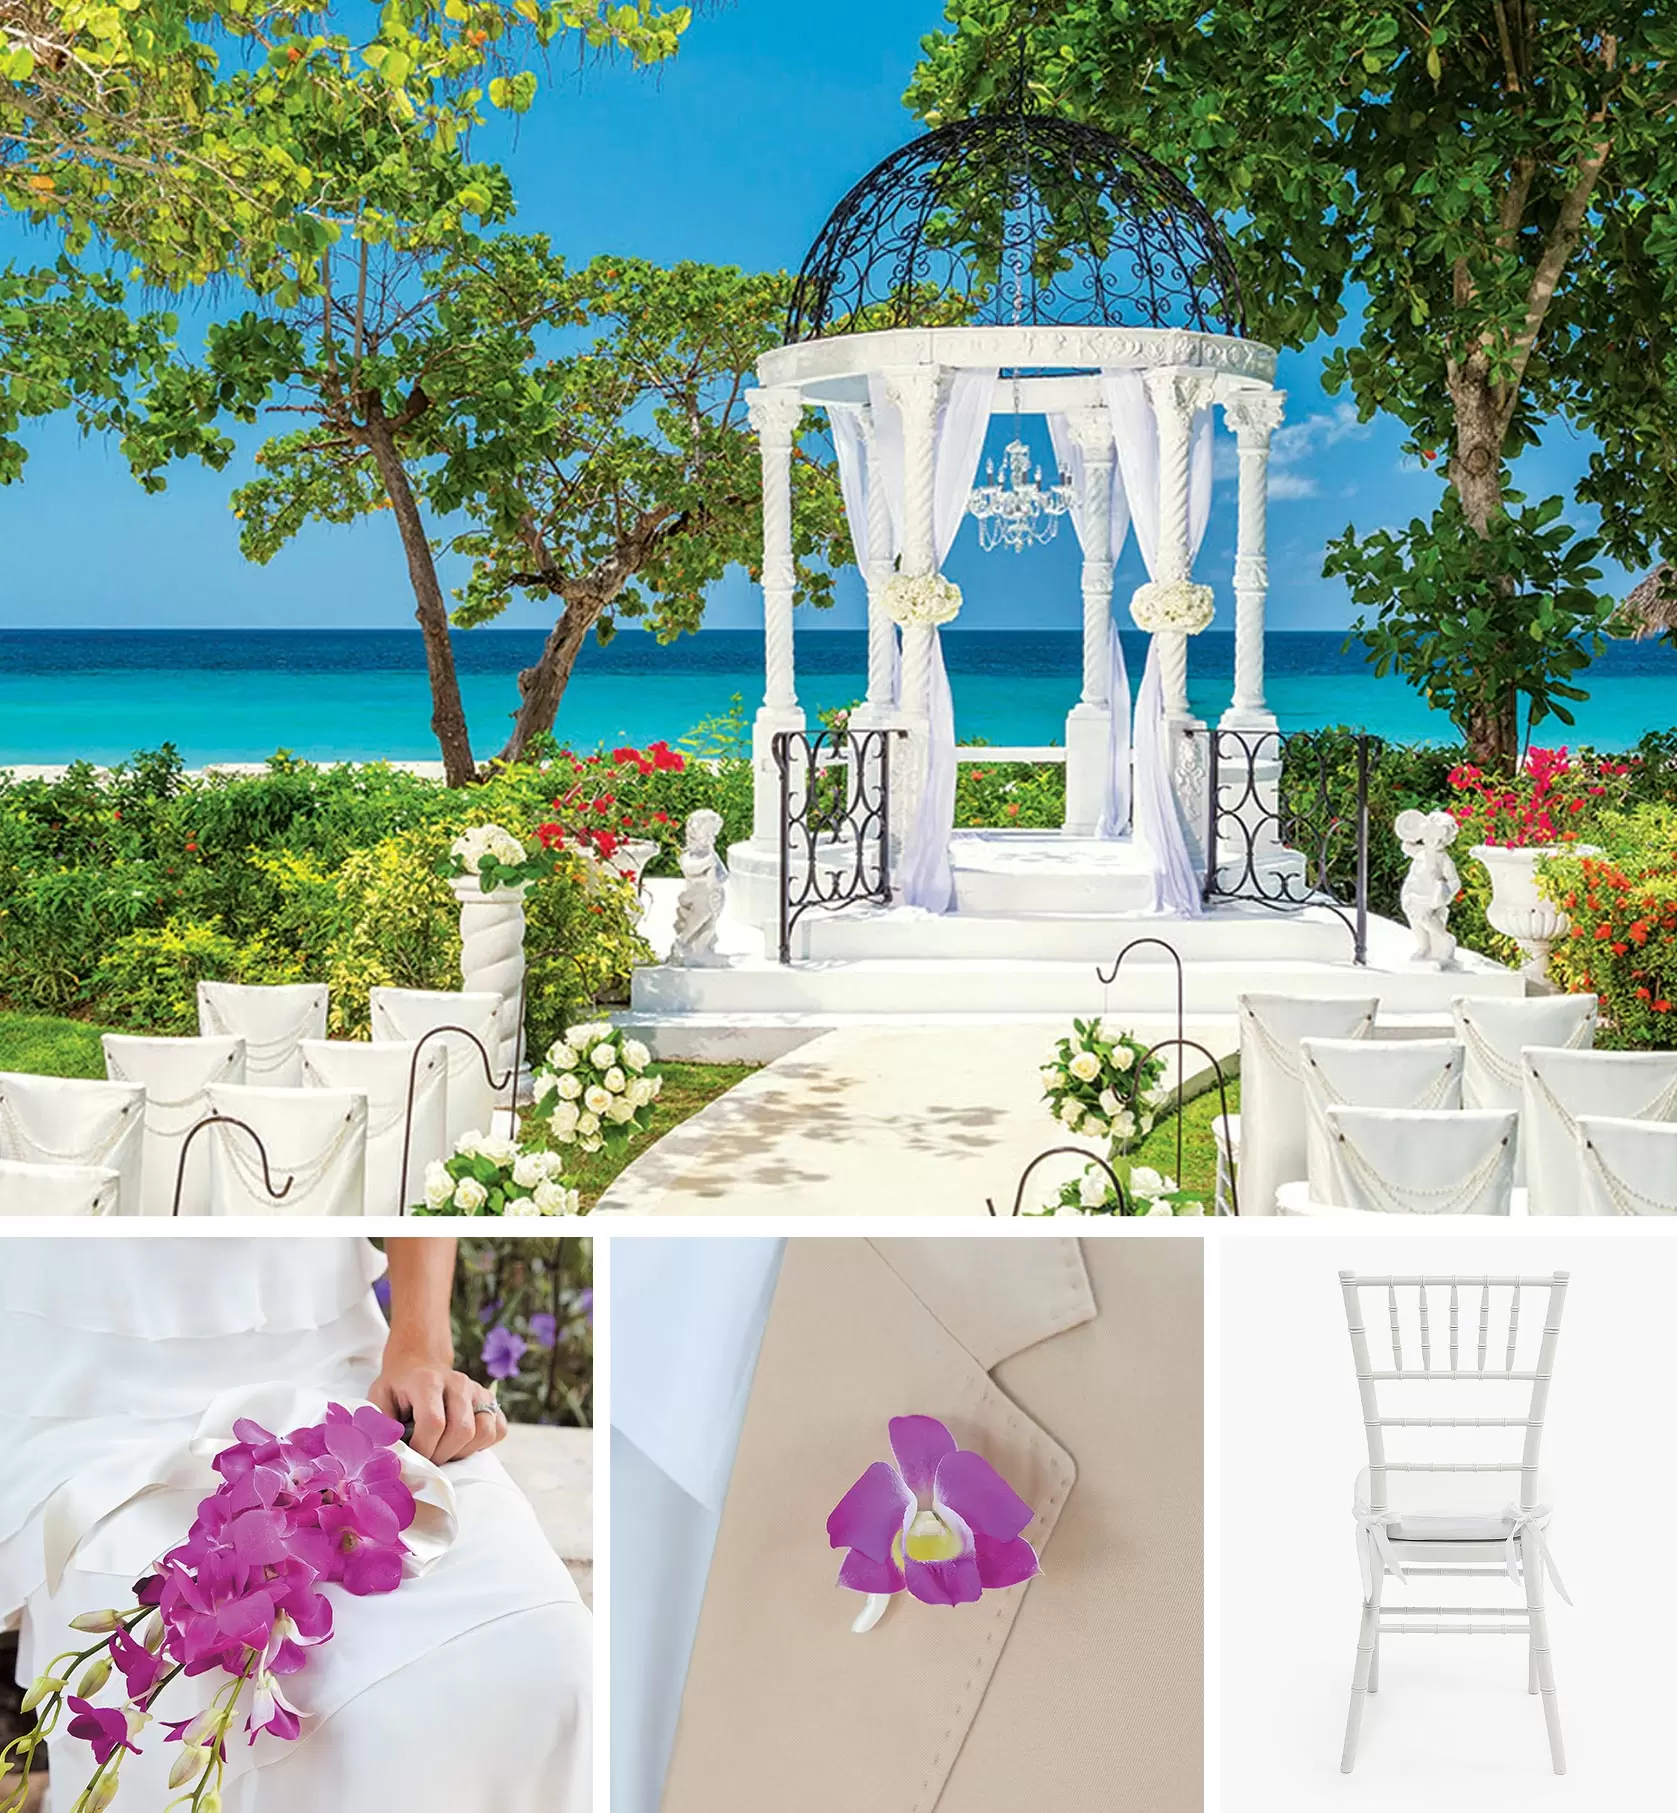 Get A Free Caribbean Wedding With A 3 Night Stay Beaches